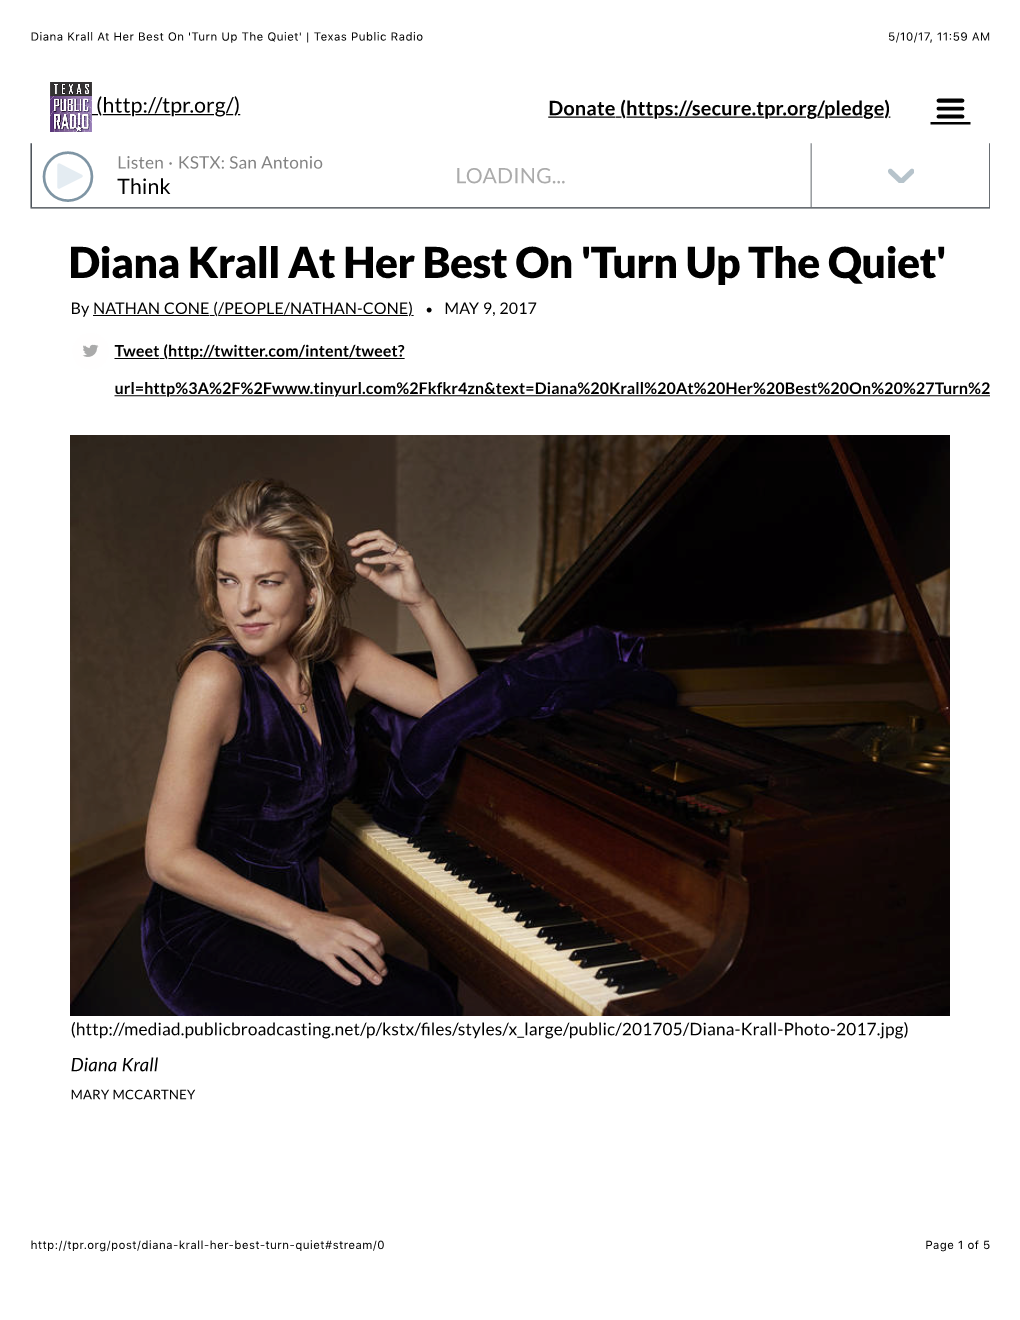 Diana Krall at Her Best on 'Turn up the Quiet' | Texas Public Radio 5/10/17, 11:59 AM